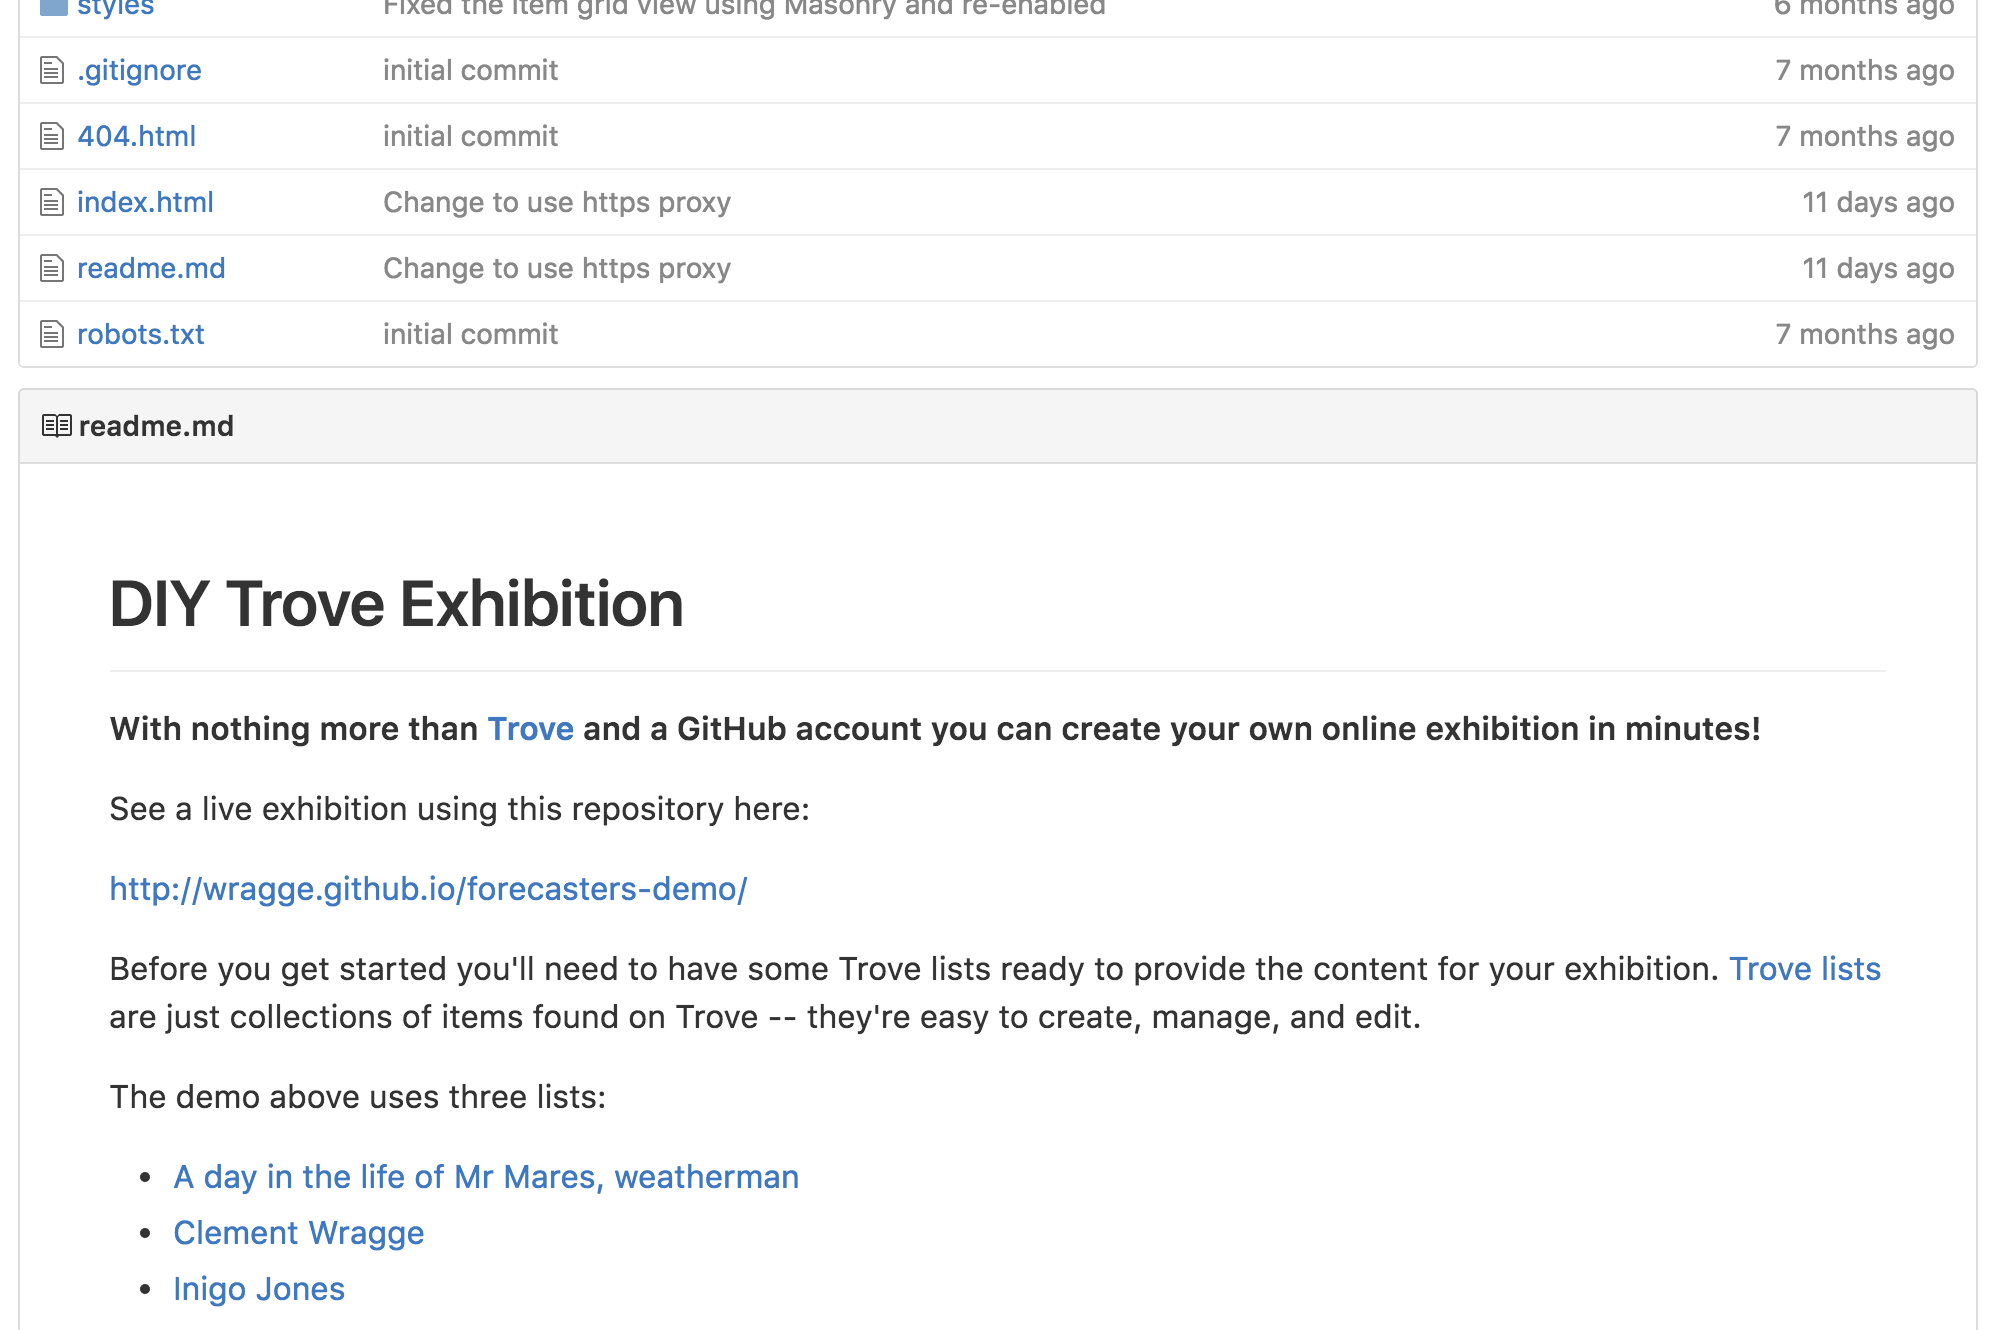 DIY Trove exhibition repository on Github